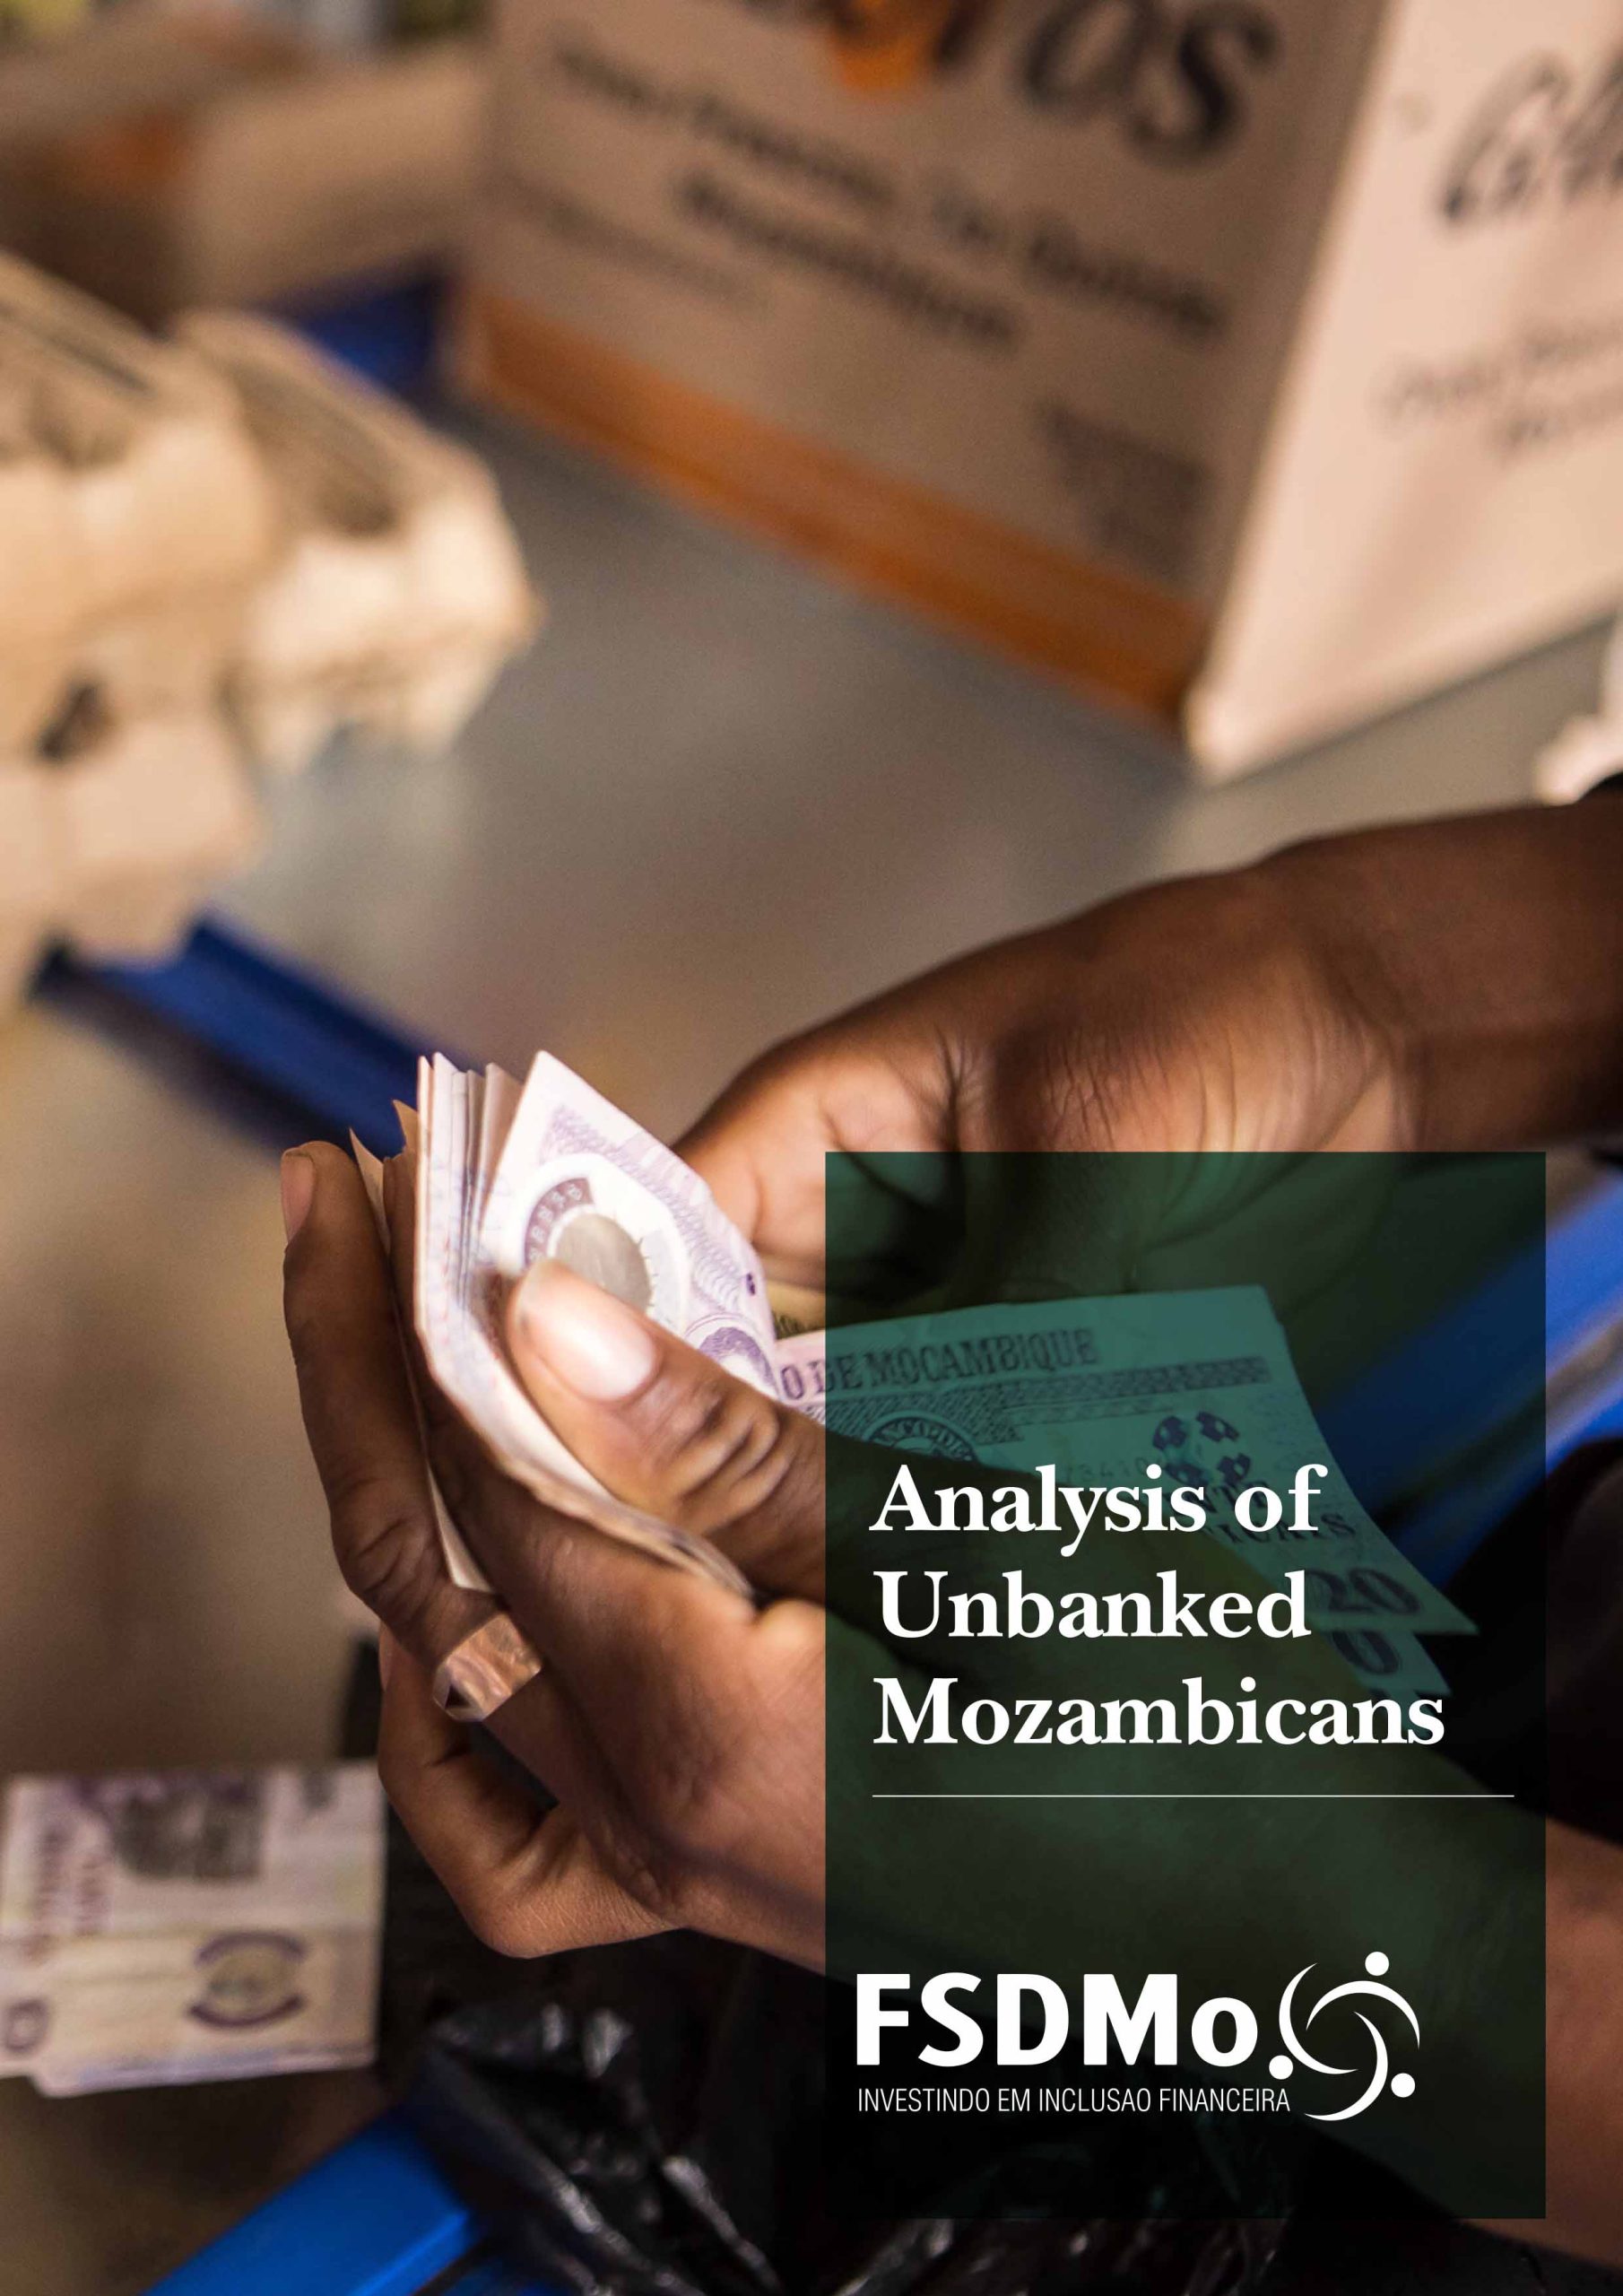 <!DOCTYPE html> <html lang="en"> <head>     <meta charset="UTF-8">     <meta name="viewport" content="width=device-width, initial-scale=1.0">     <title>ANALYSIS OF THE UNBANKED MOZAMBICANS</title>     <style>         a {             color: #8FC73F;             text-decoration: none; /* Remove underline */             transition: color 0.3s; /* Smooth transition for color change */         }          a:hover {             color: #ffffff; /* Change color to white on hover */         }     </style> </head> <body>     <p><a href="https://www.fsdmoc.org.mz/wp-content/uploads/2023/06/ANALYSIS_OF_THE_UNBANKED_MOZAMBICANS.pdf" target="_blank">ANALYSIS OF THE UNBANKED MOZAMBICANS</a></p> </body> </html>